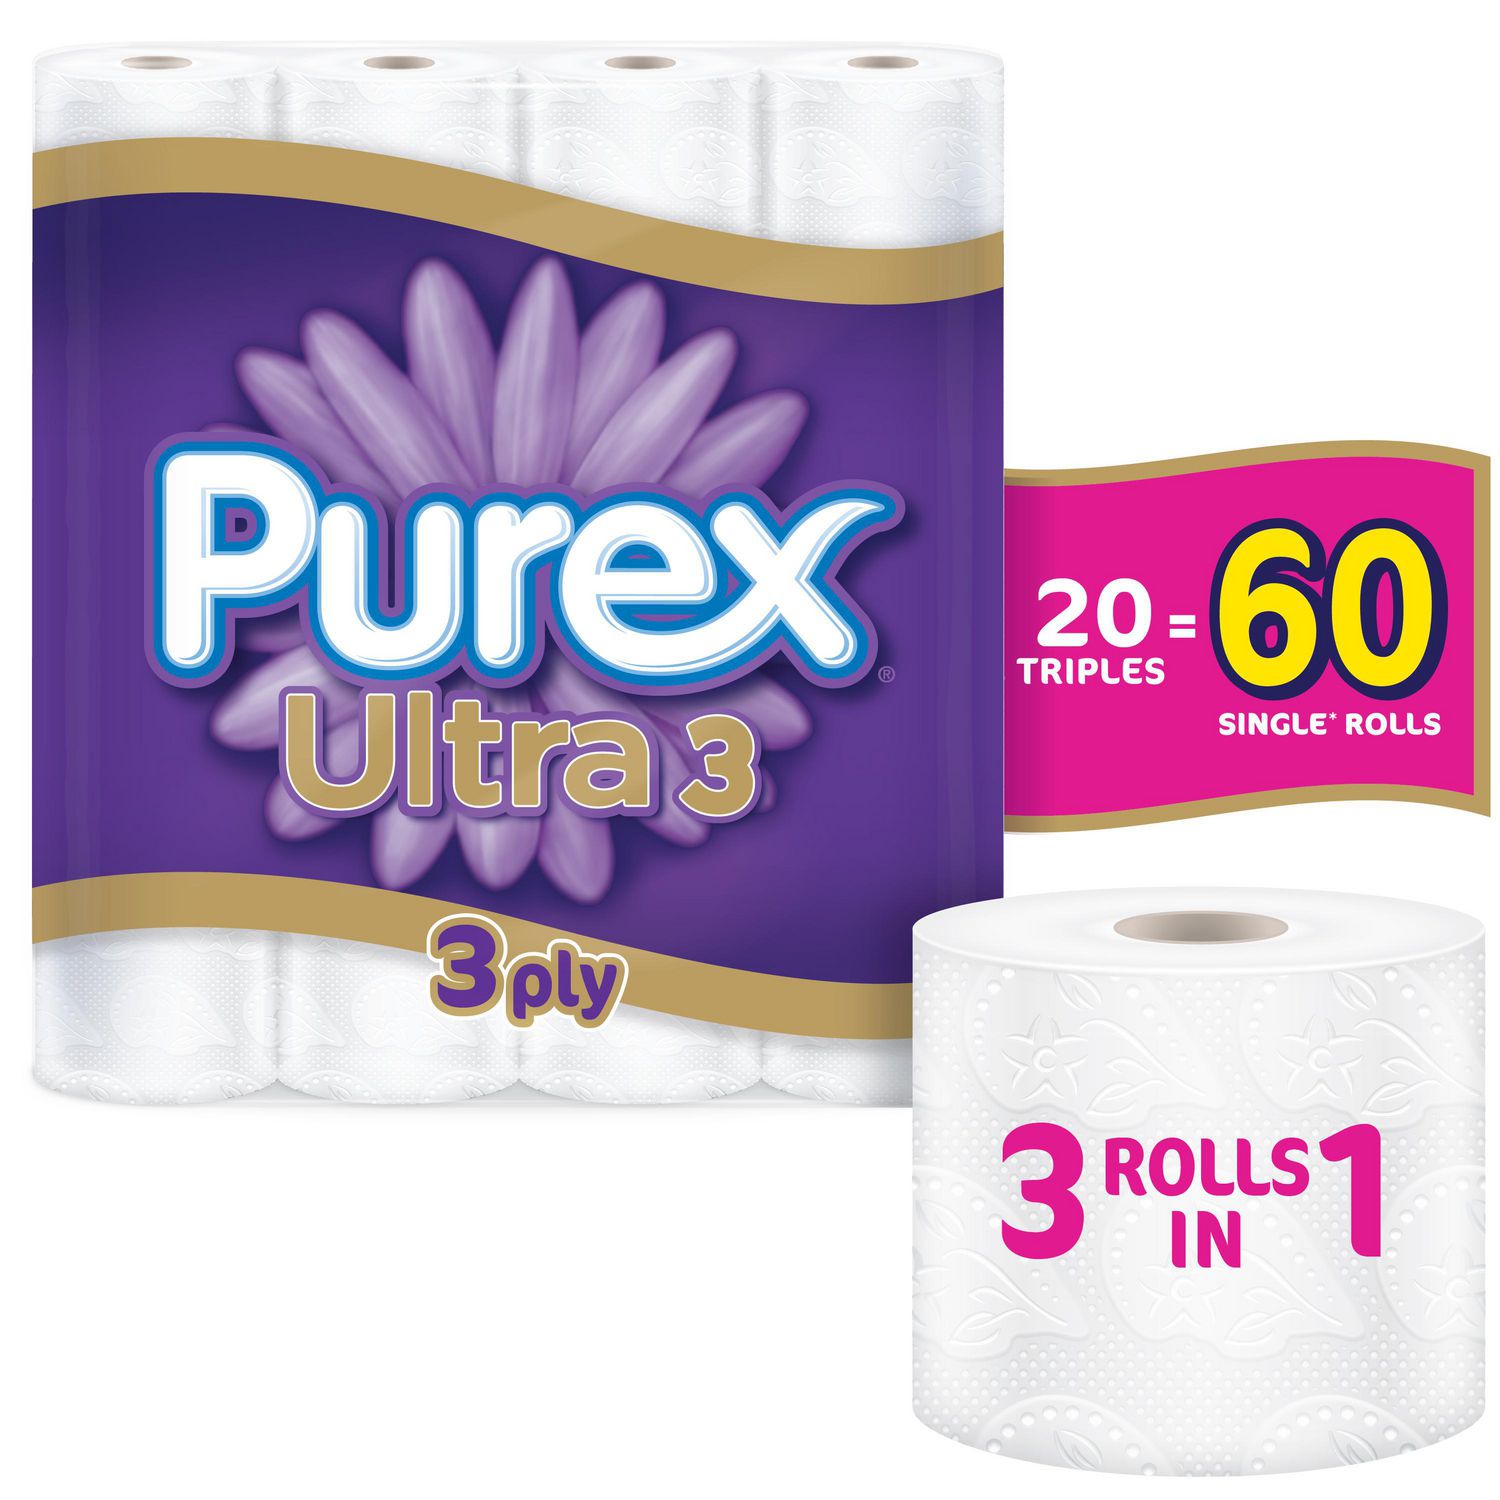 Purex Ultra 3 Ply Soft And Thick Toilet Paper Hypoallergenic And Septic